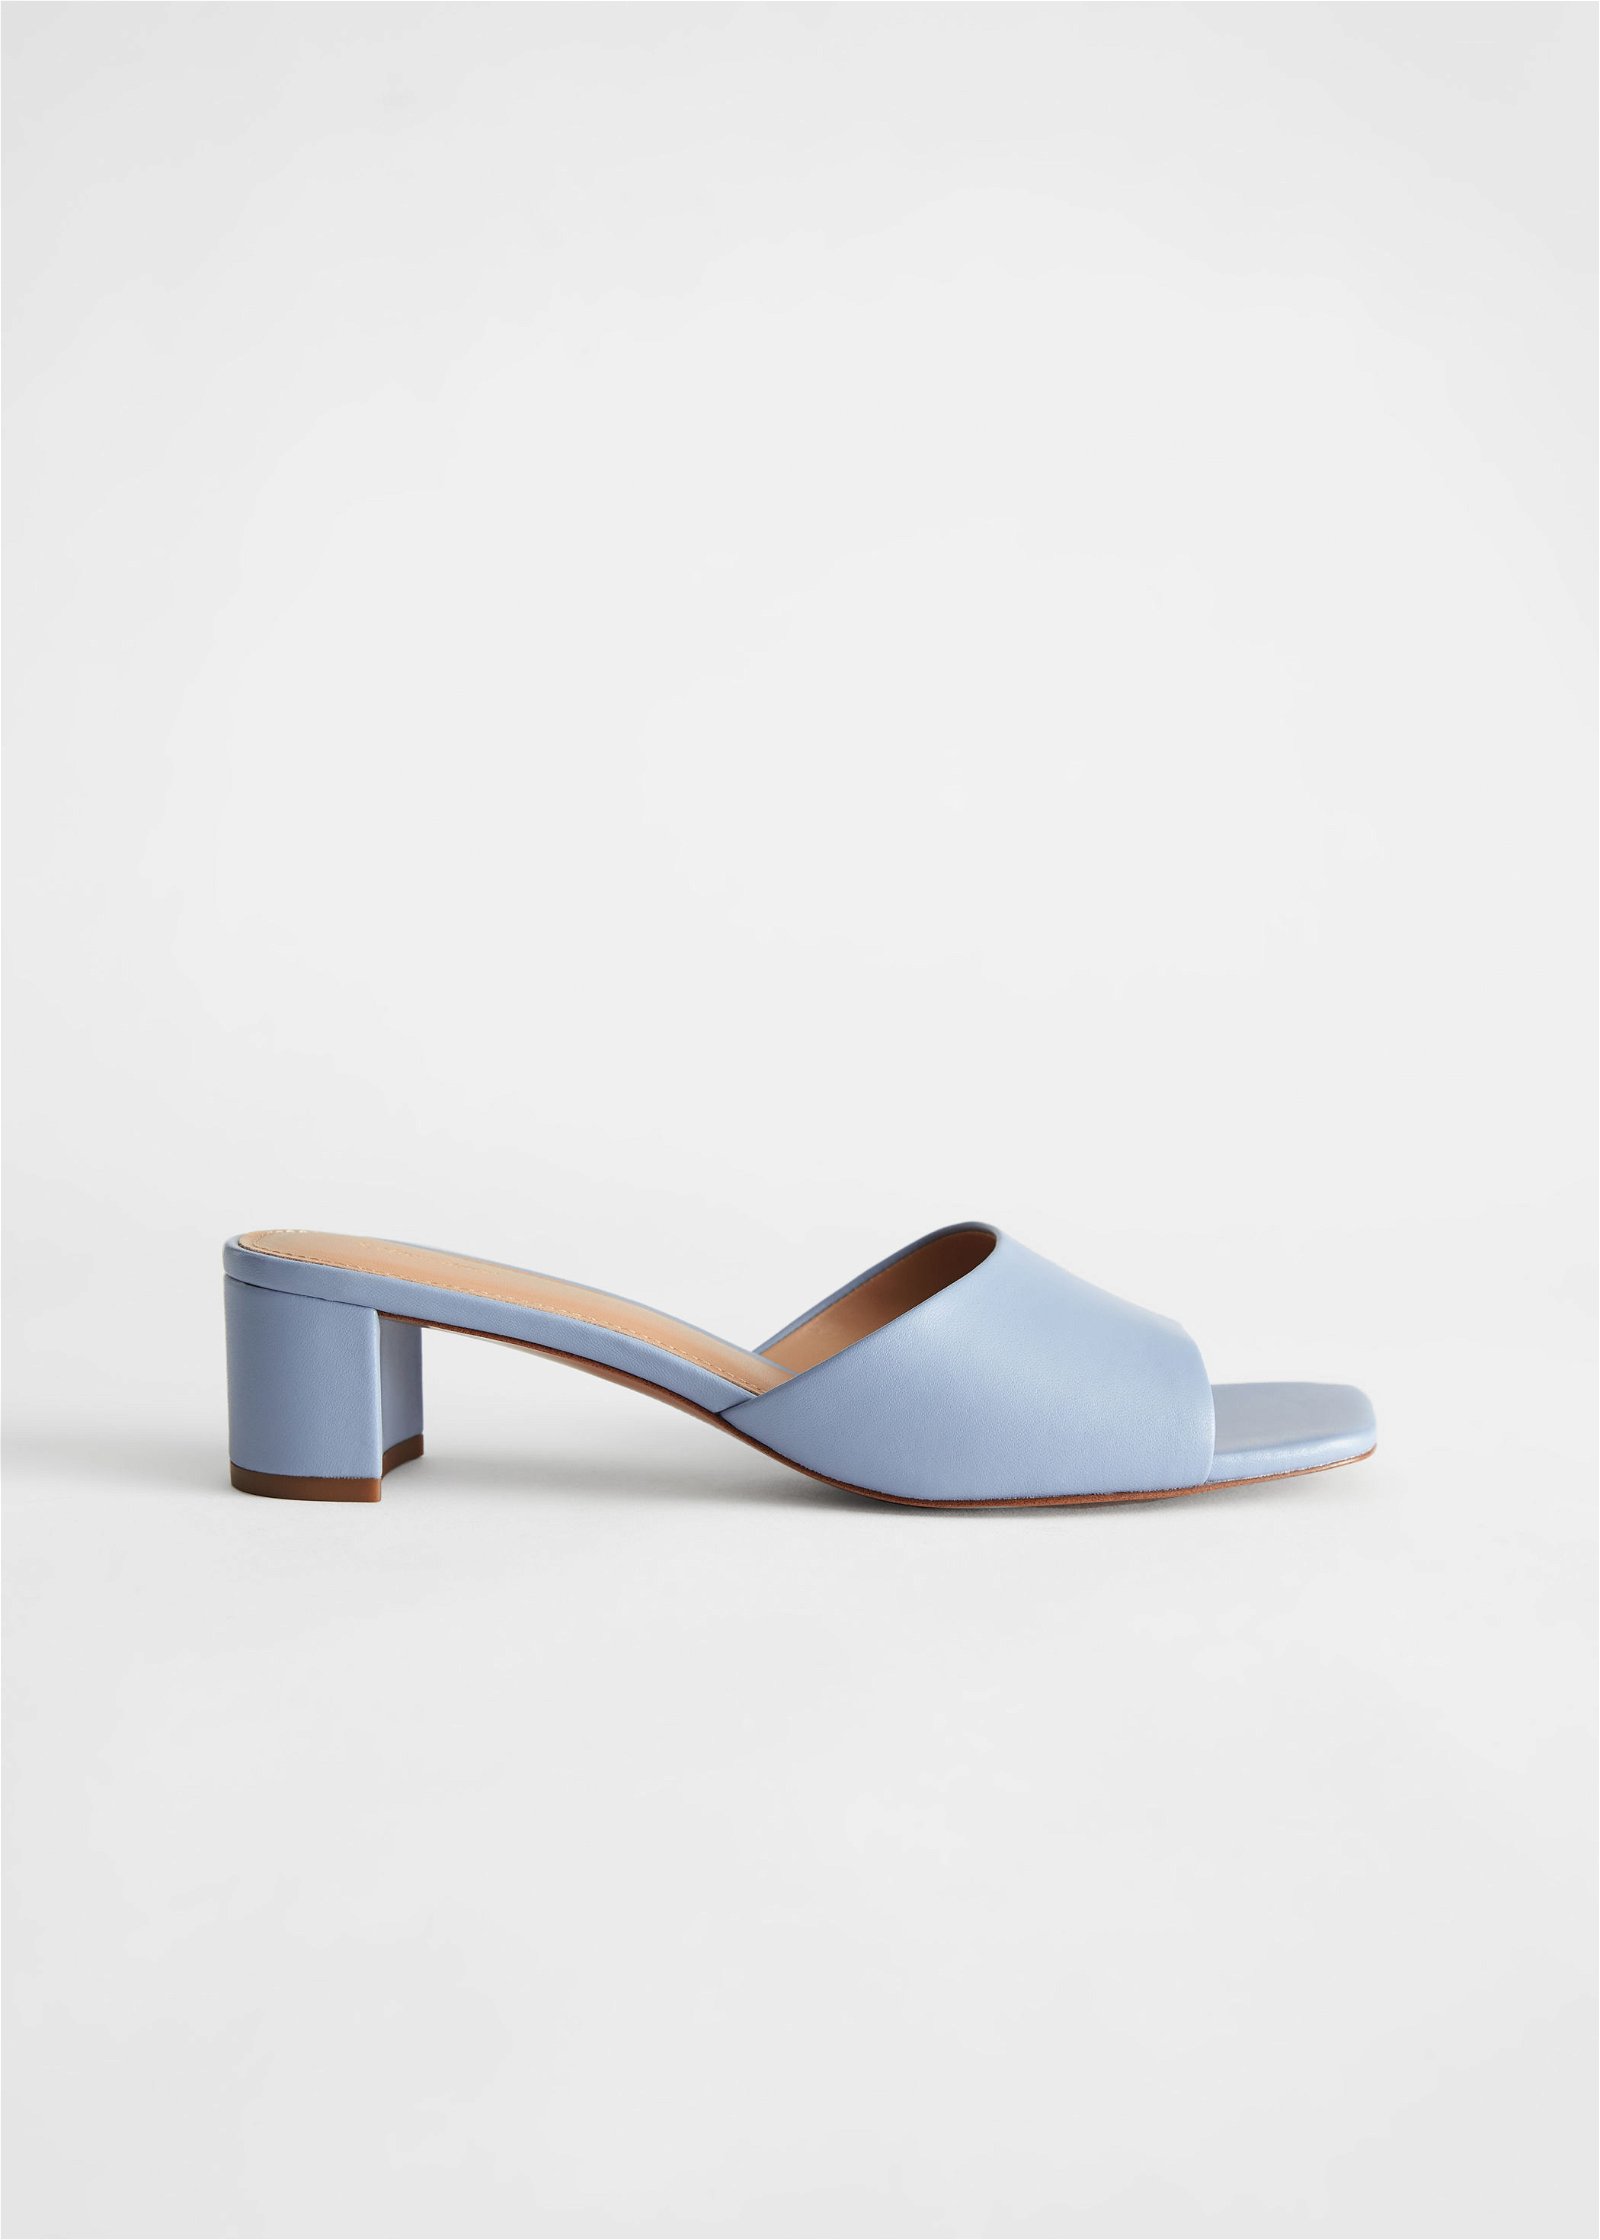 & OTHER STORIES Heeled Leather Square Toe Sandal in Blue | Endource